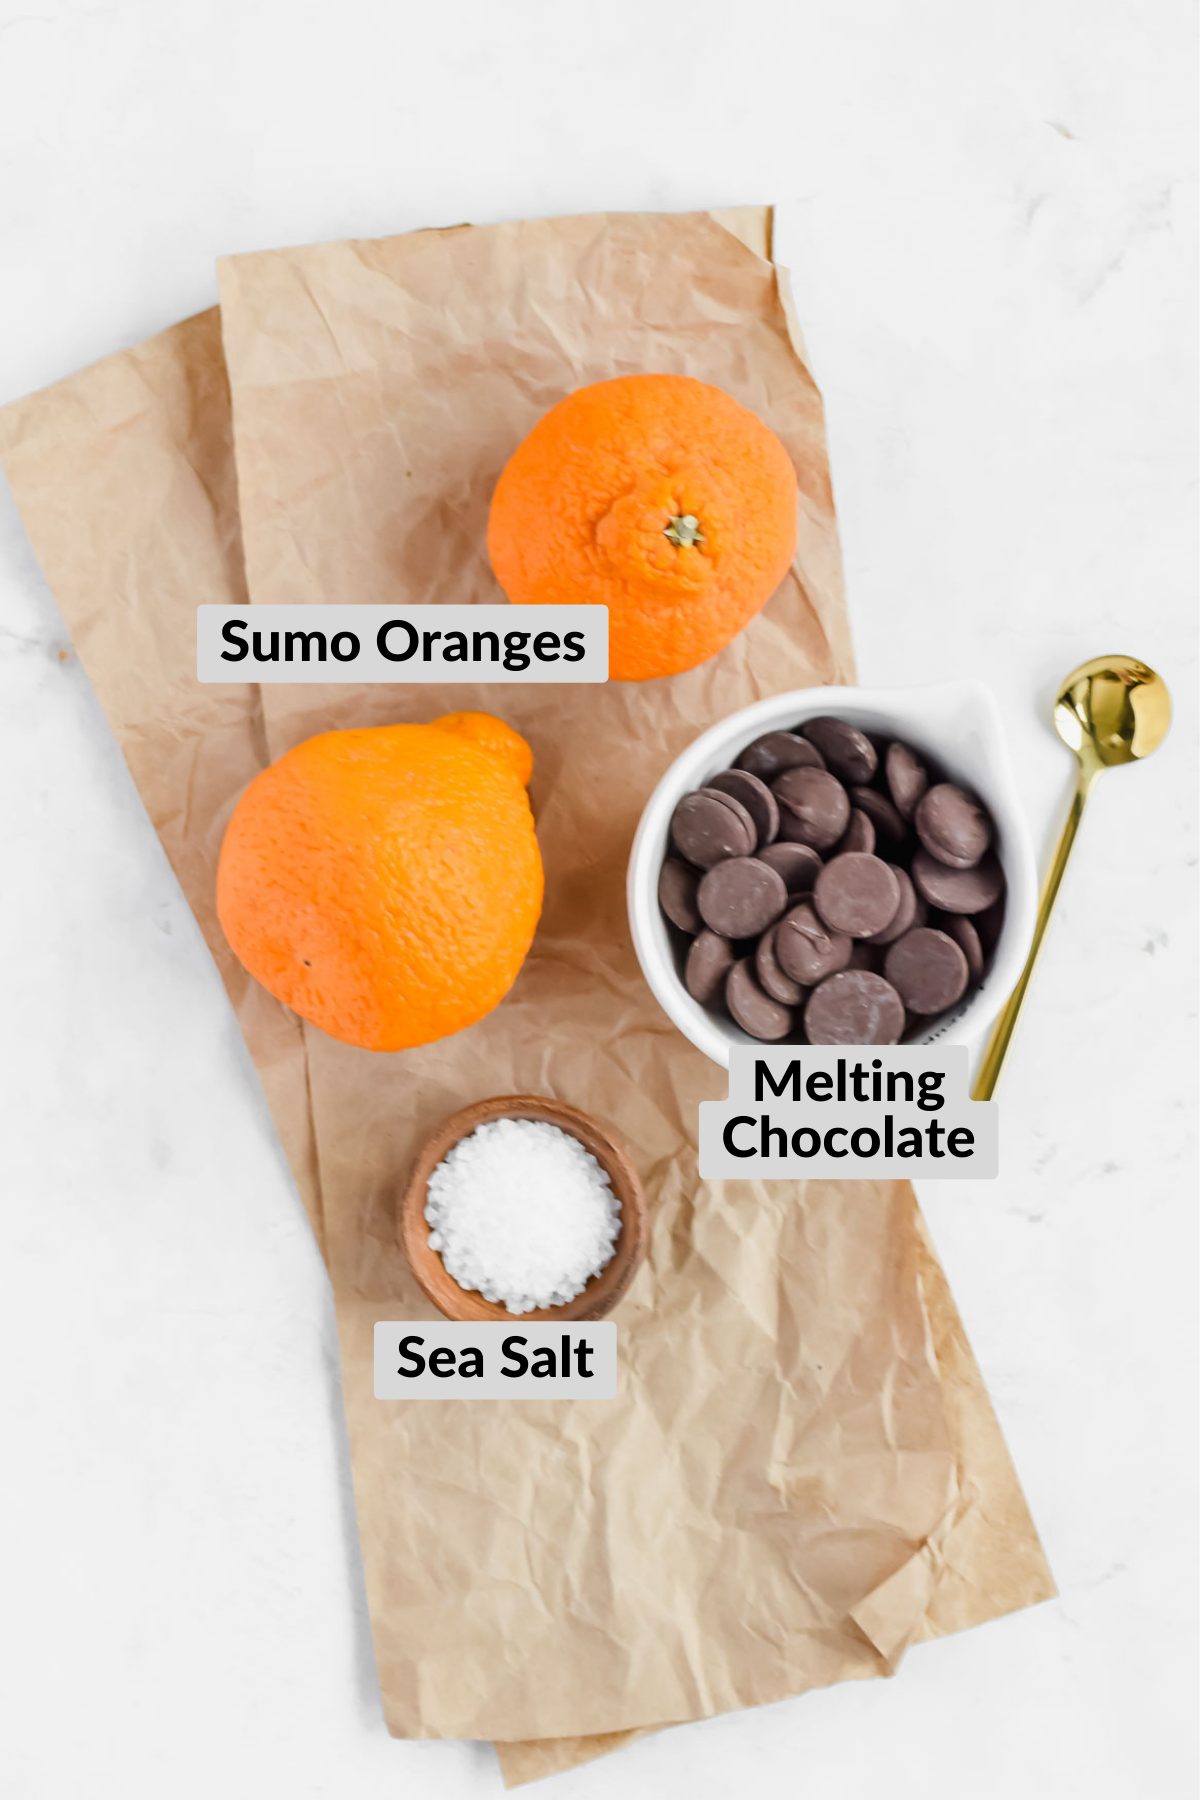 ingredients for chocolate covered oranges on parchment papper on white background.